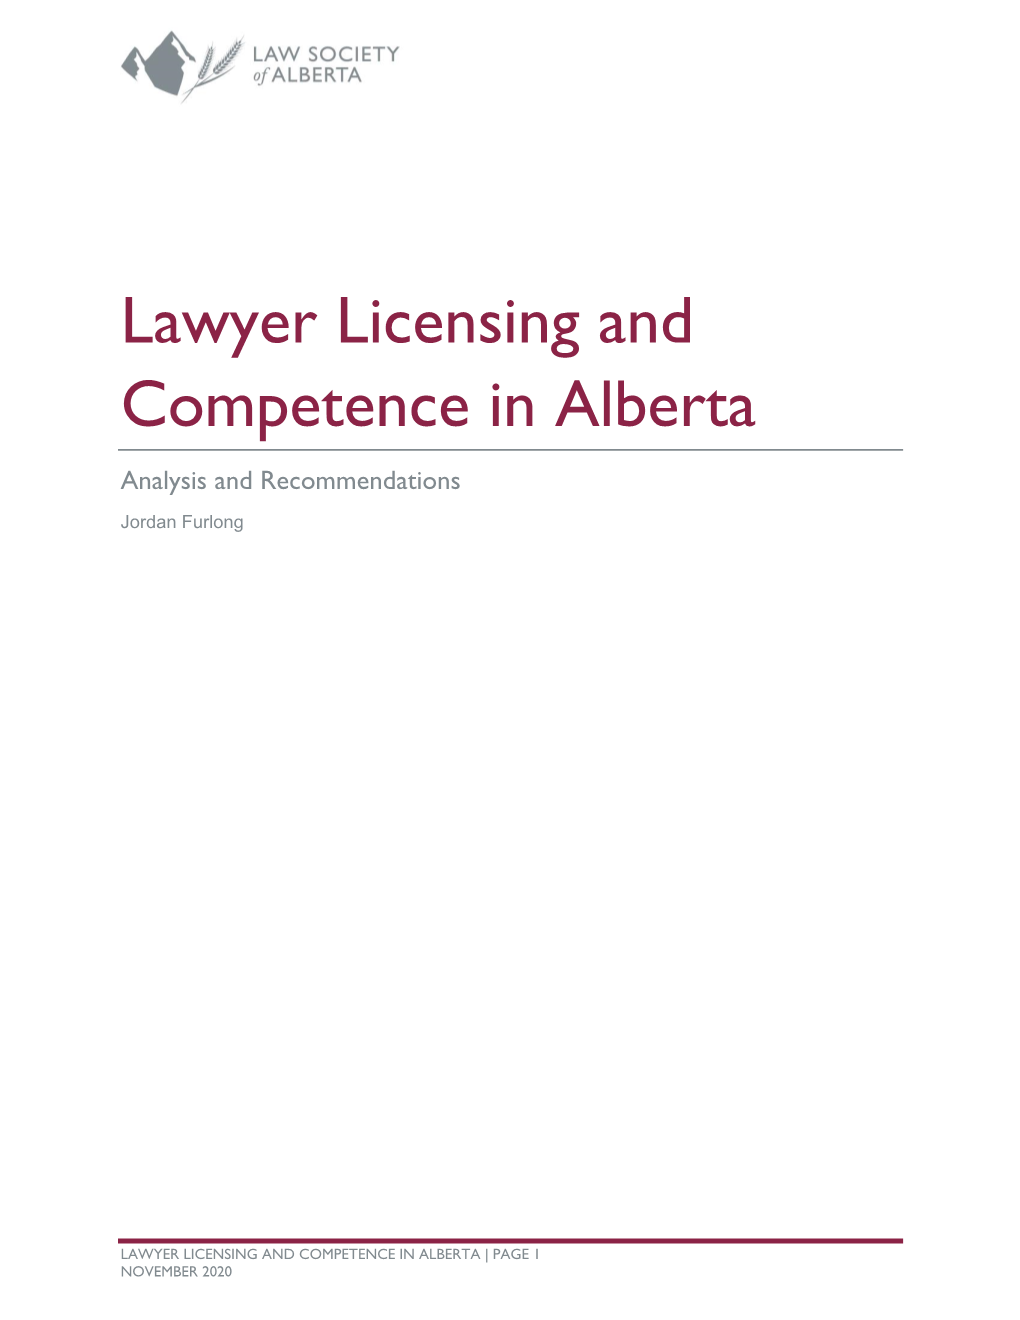 Lawyer Licensing and Competence in Alberta